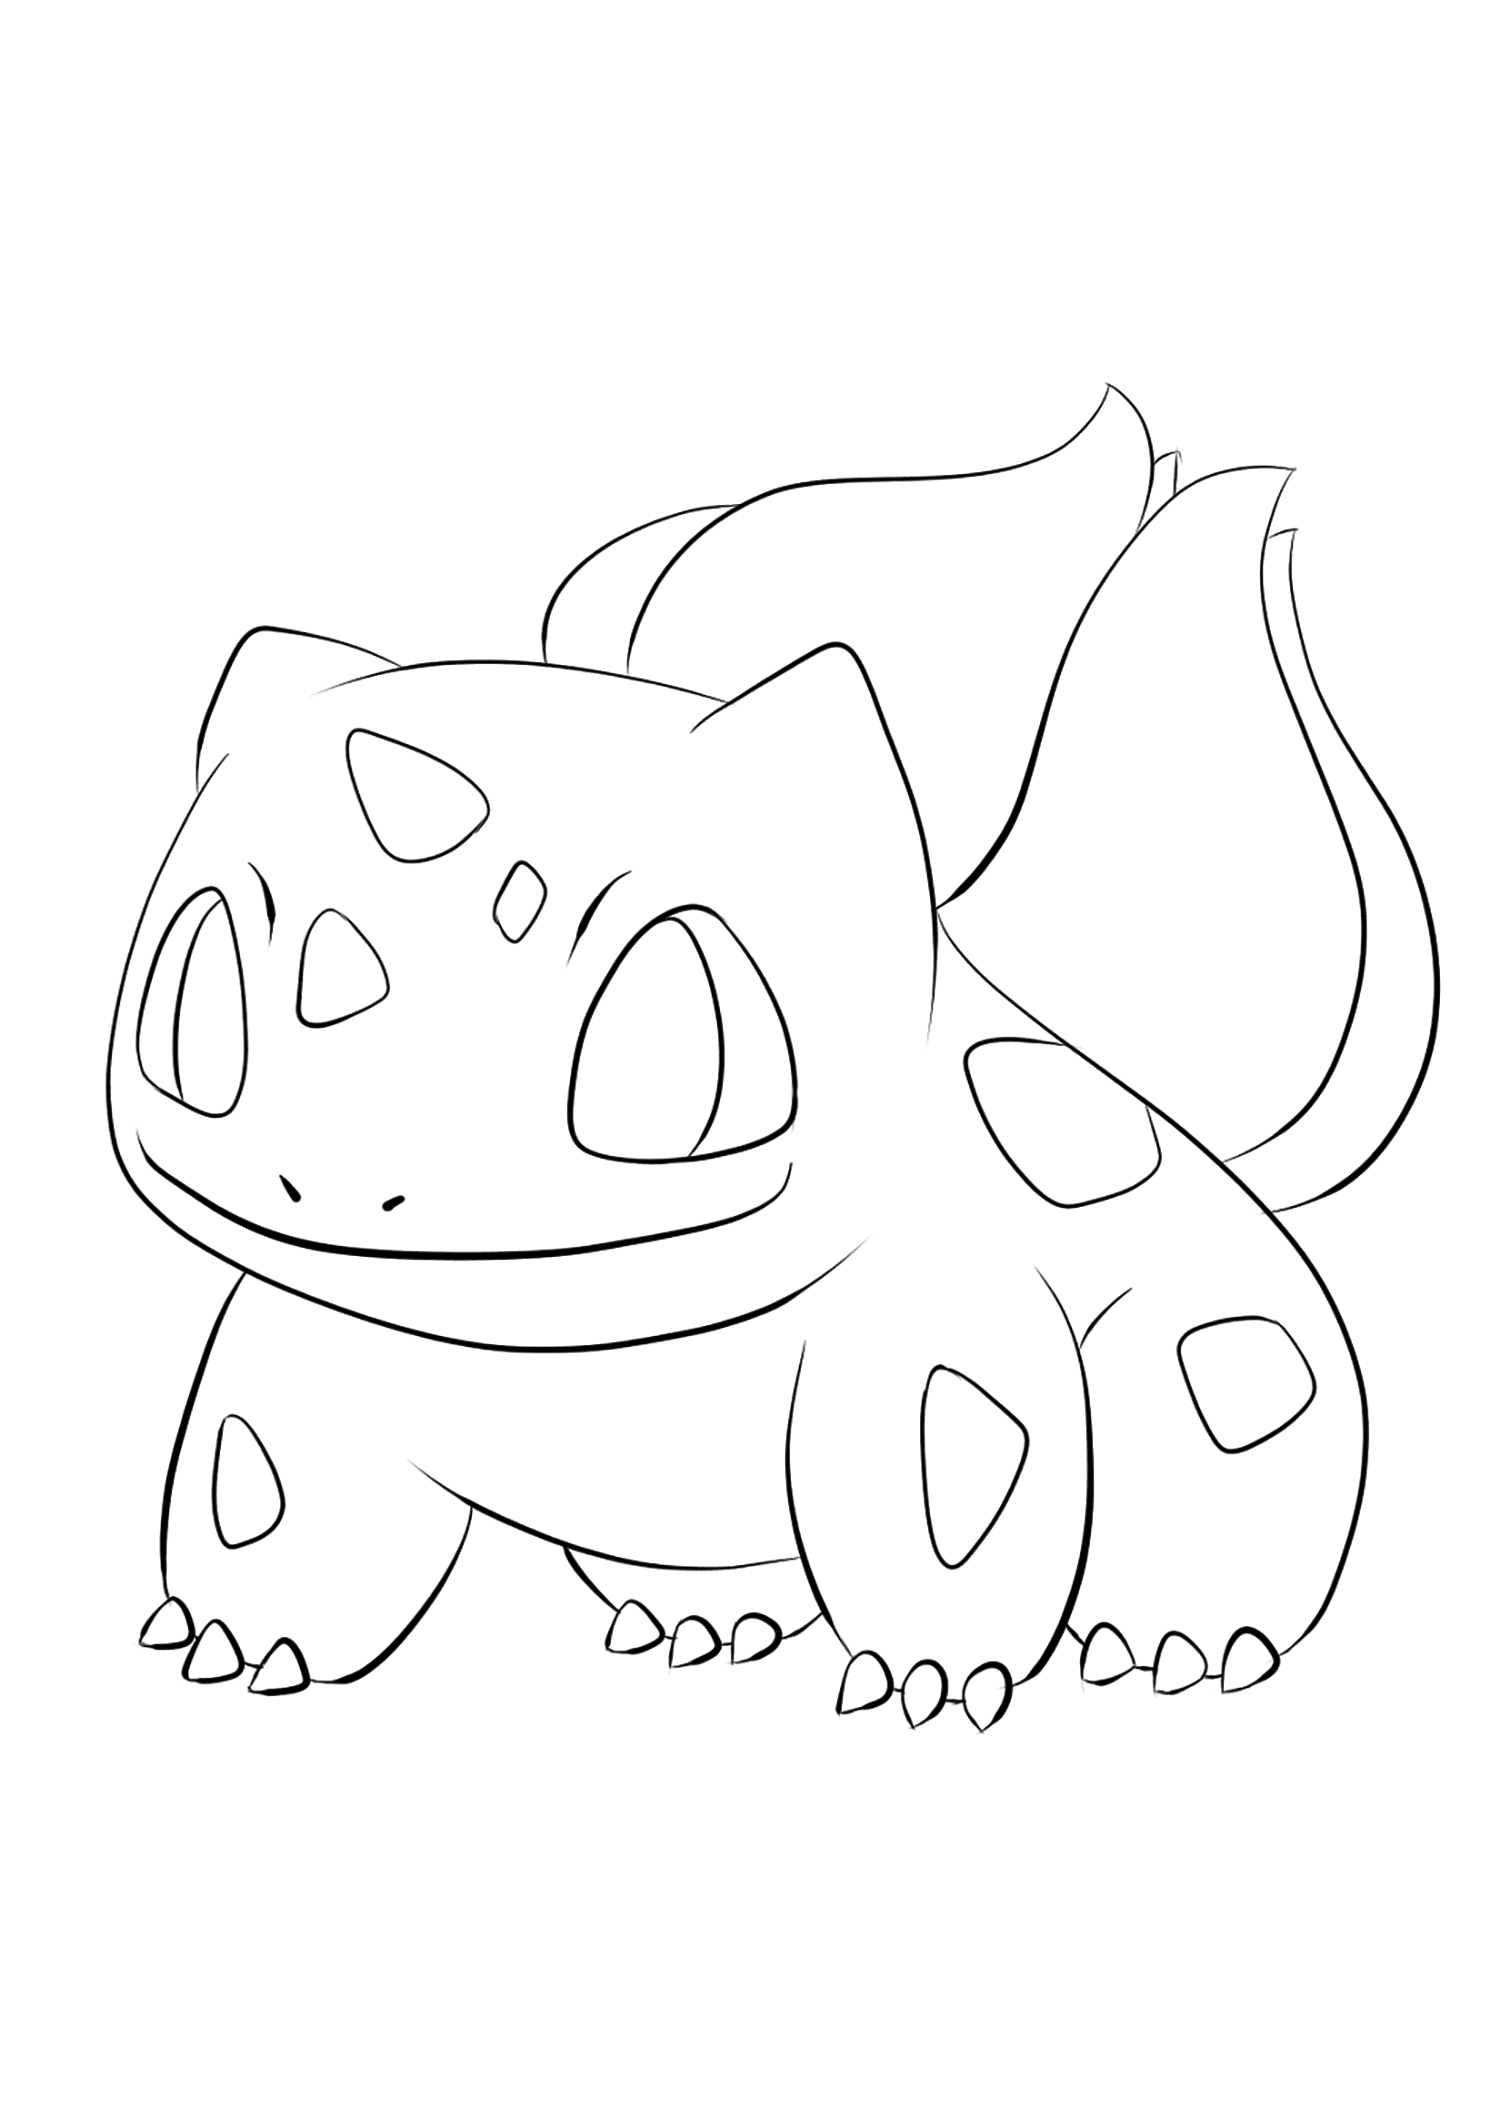 115 Simple Pokemon Bulbasaur Coloring Pages for Kids